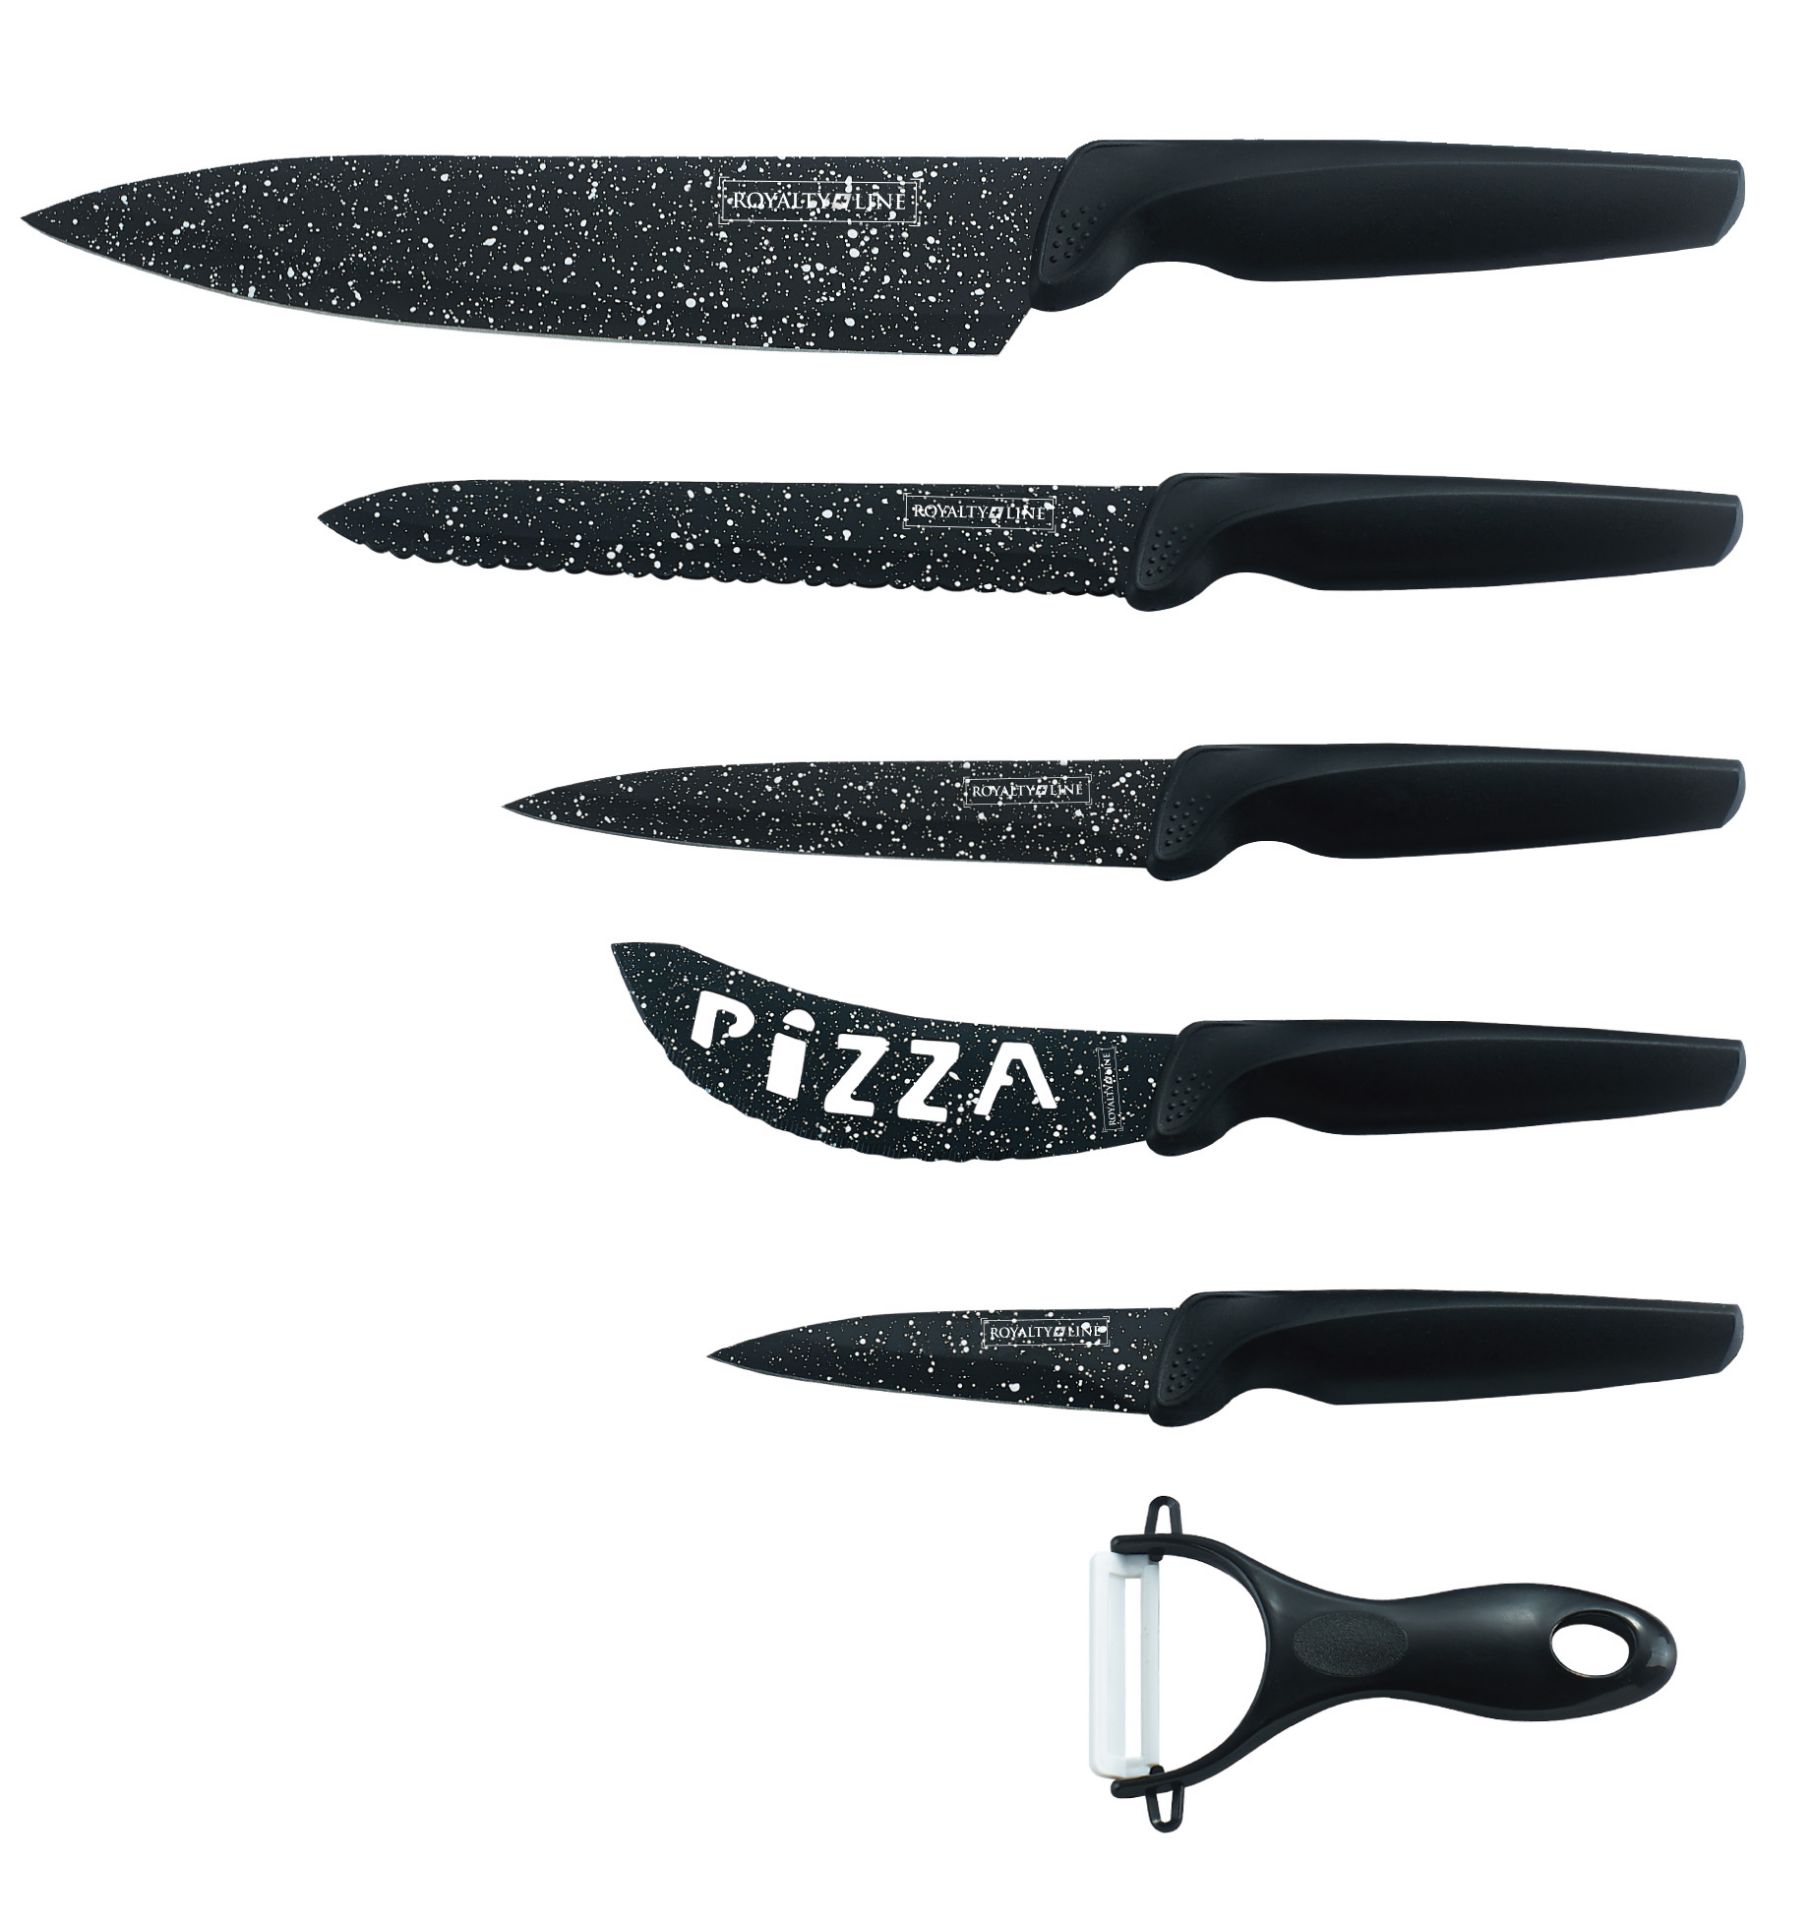 V Brand New Six Piece Marble Coated Knife Set Includes 8 Inch Chef Knife - 6 Inch Bread Knife - 5